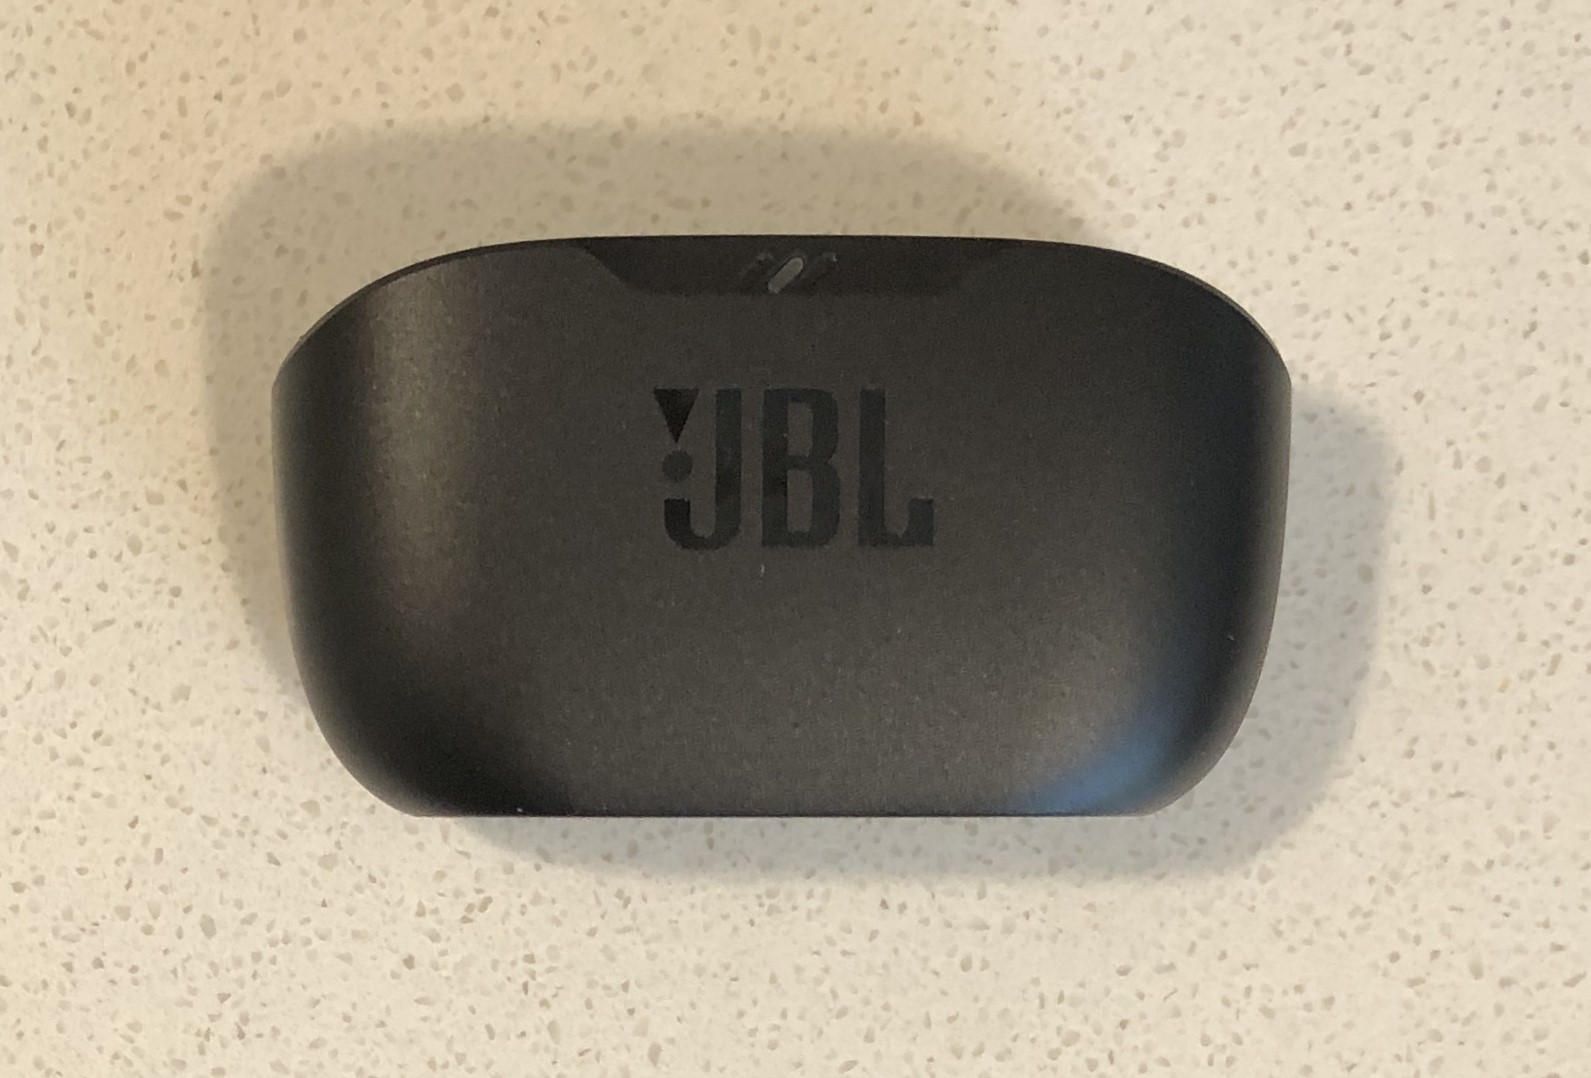 JBL Vibe Buds charging case front